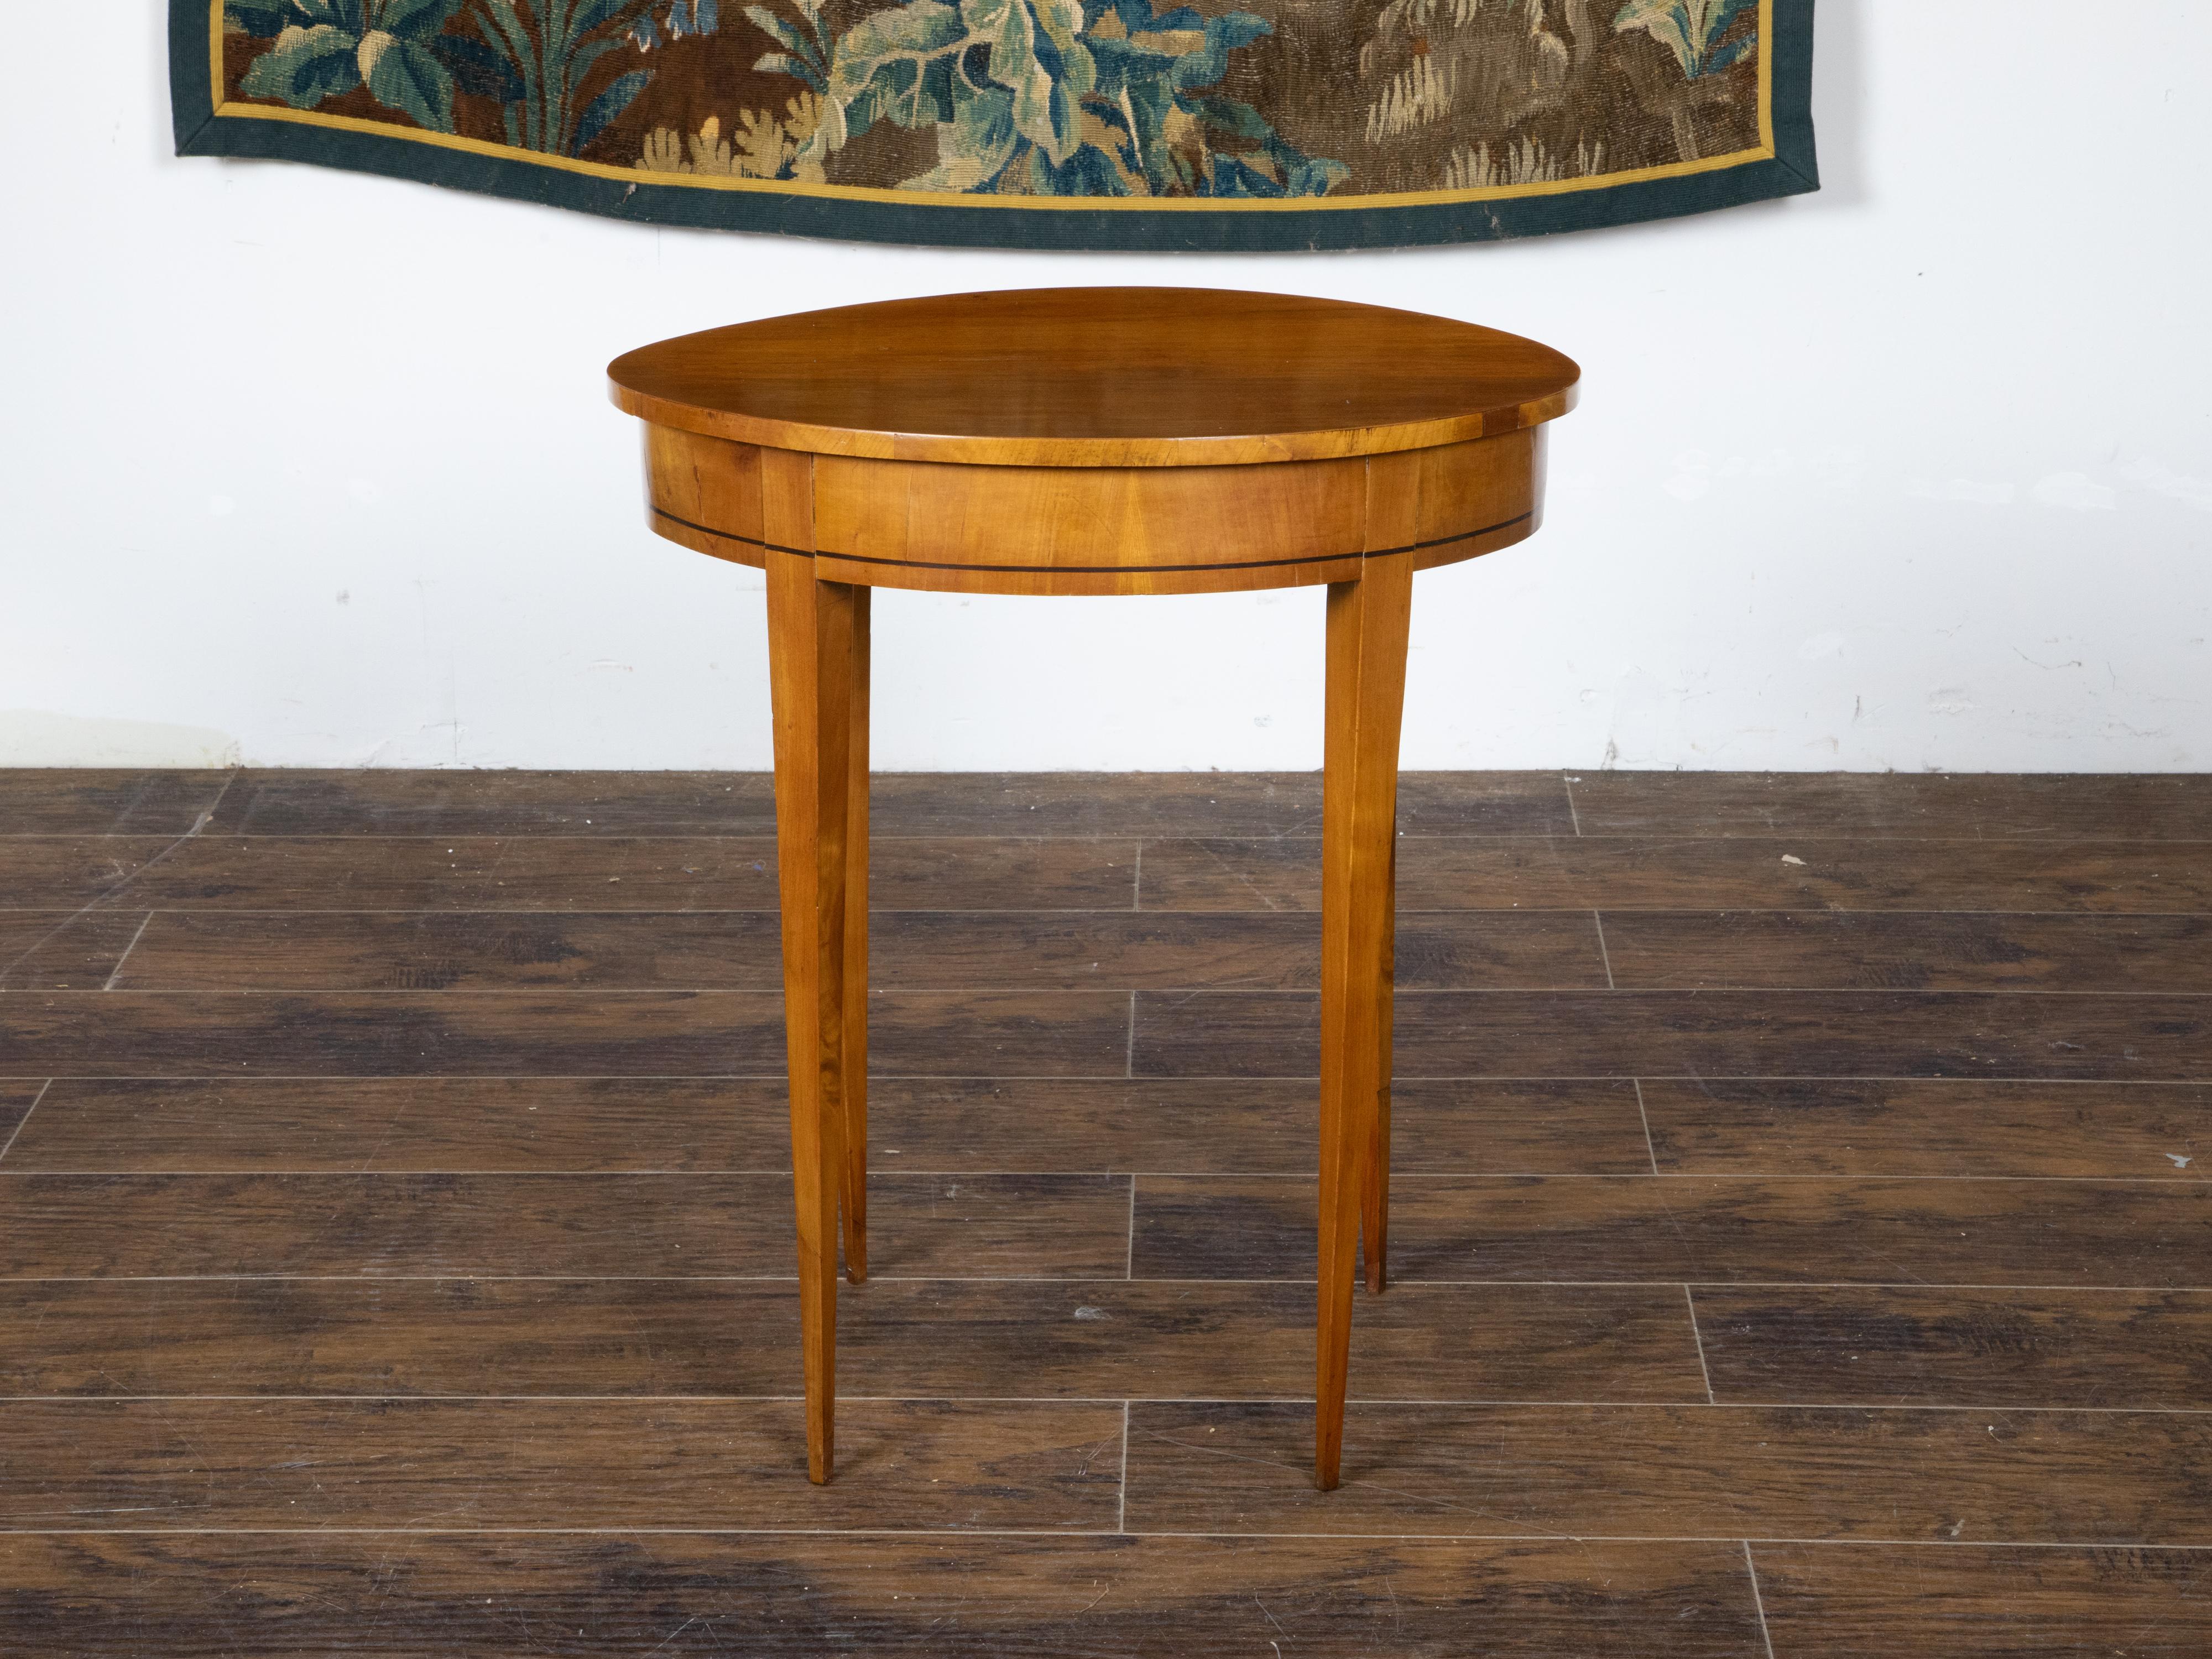 French Neoclassical Style 19th Century Walnut Table with Oval Top, Tapered Legs In Good Condition For Sale In Atlanta, GA